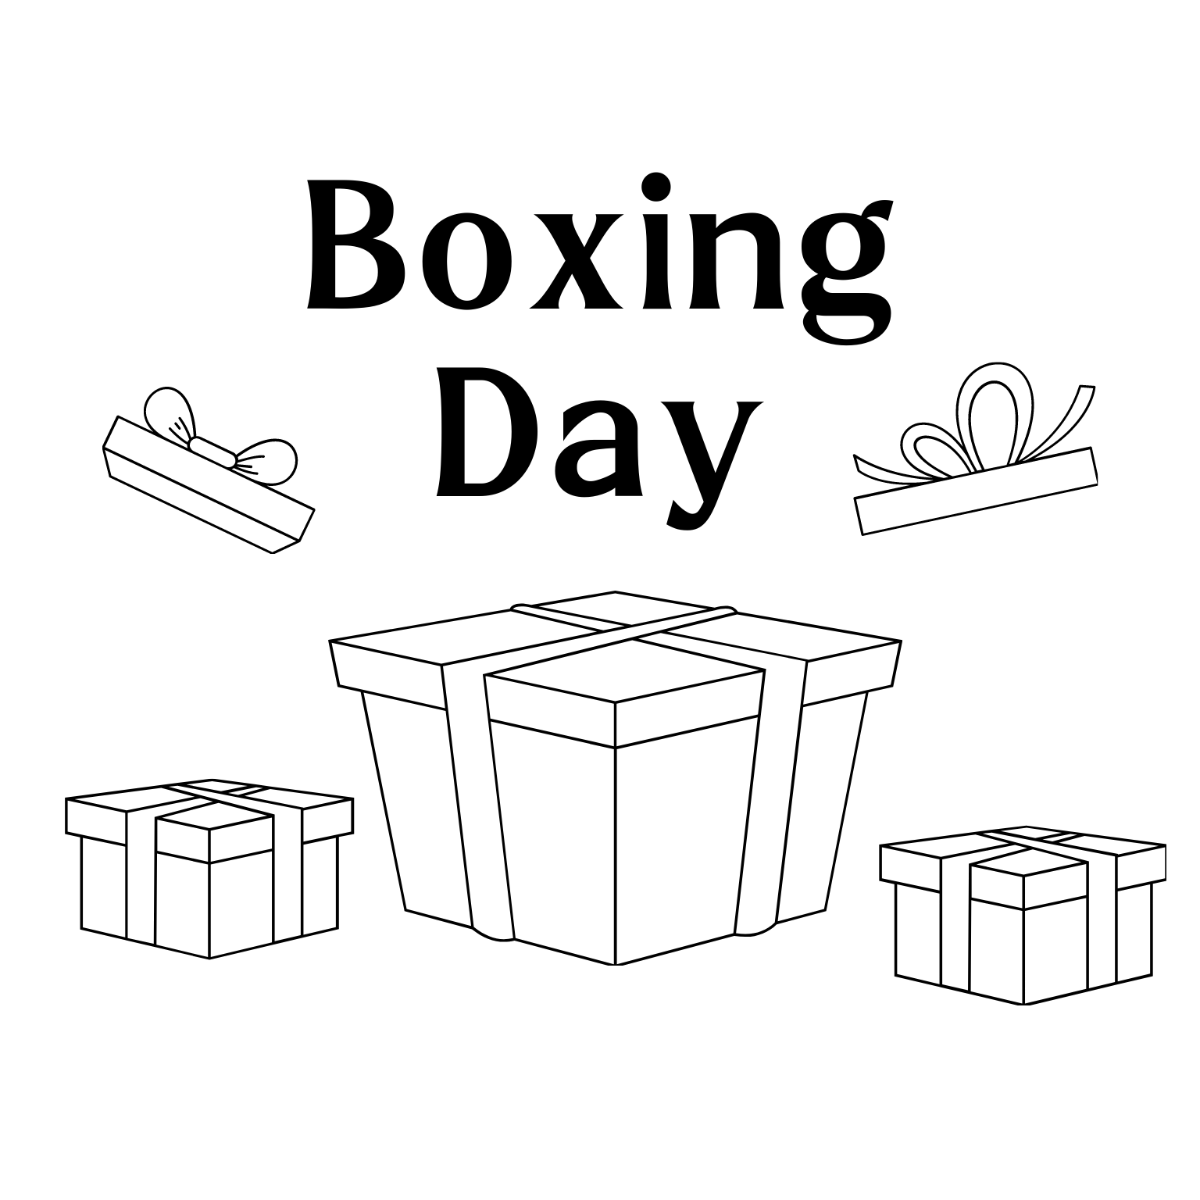 Boxing Day Drawing Template